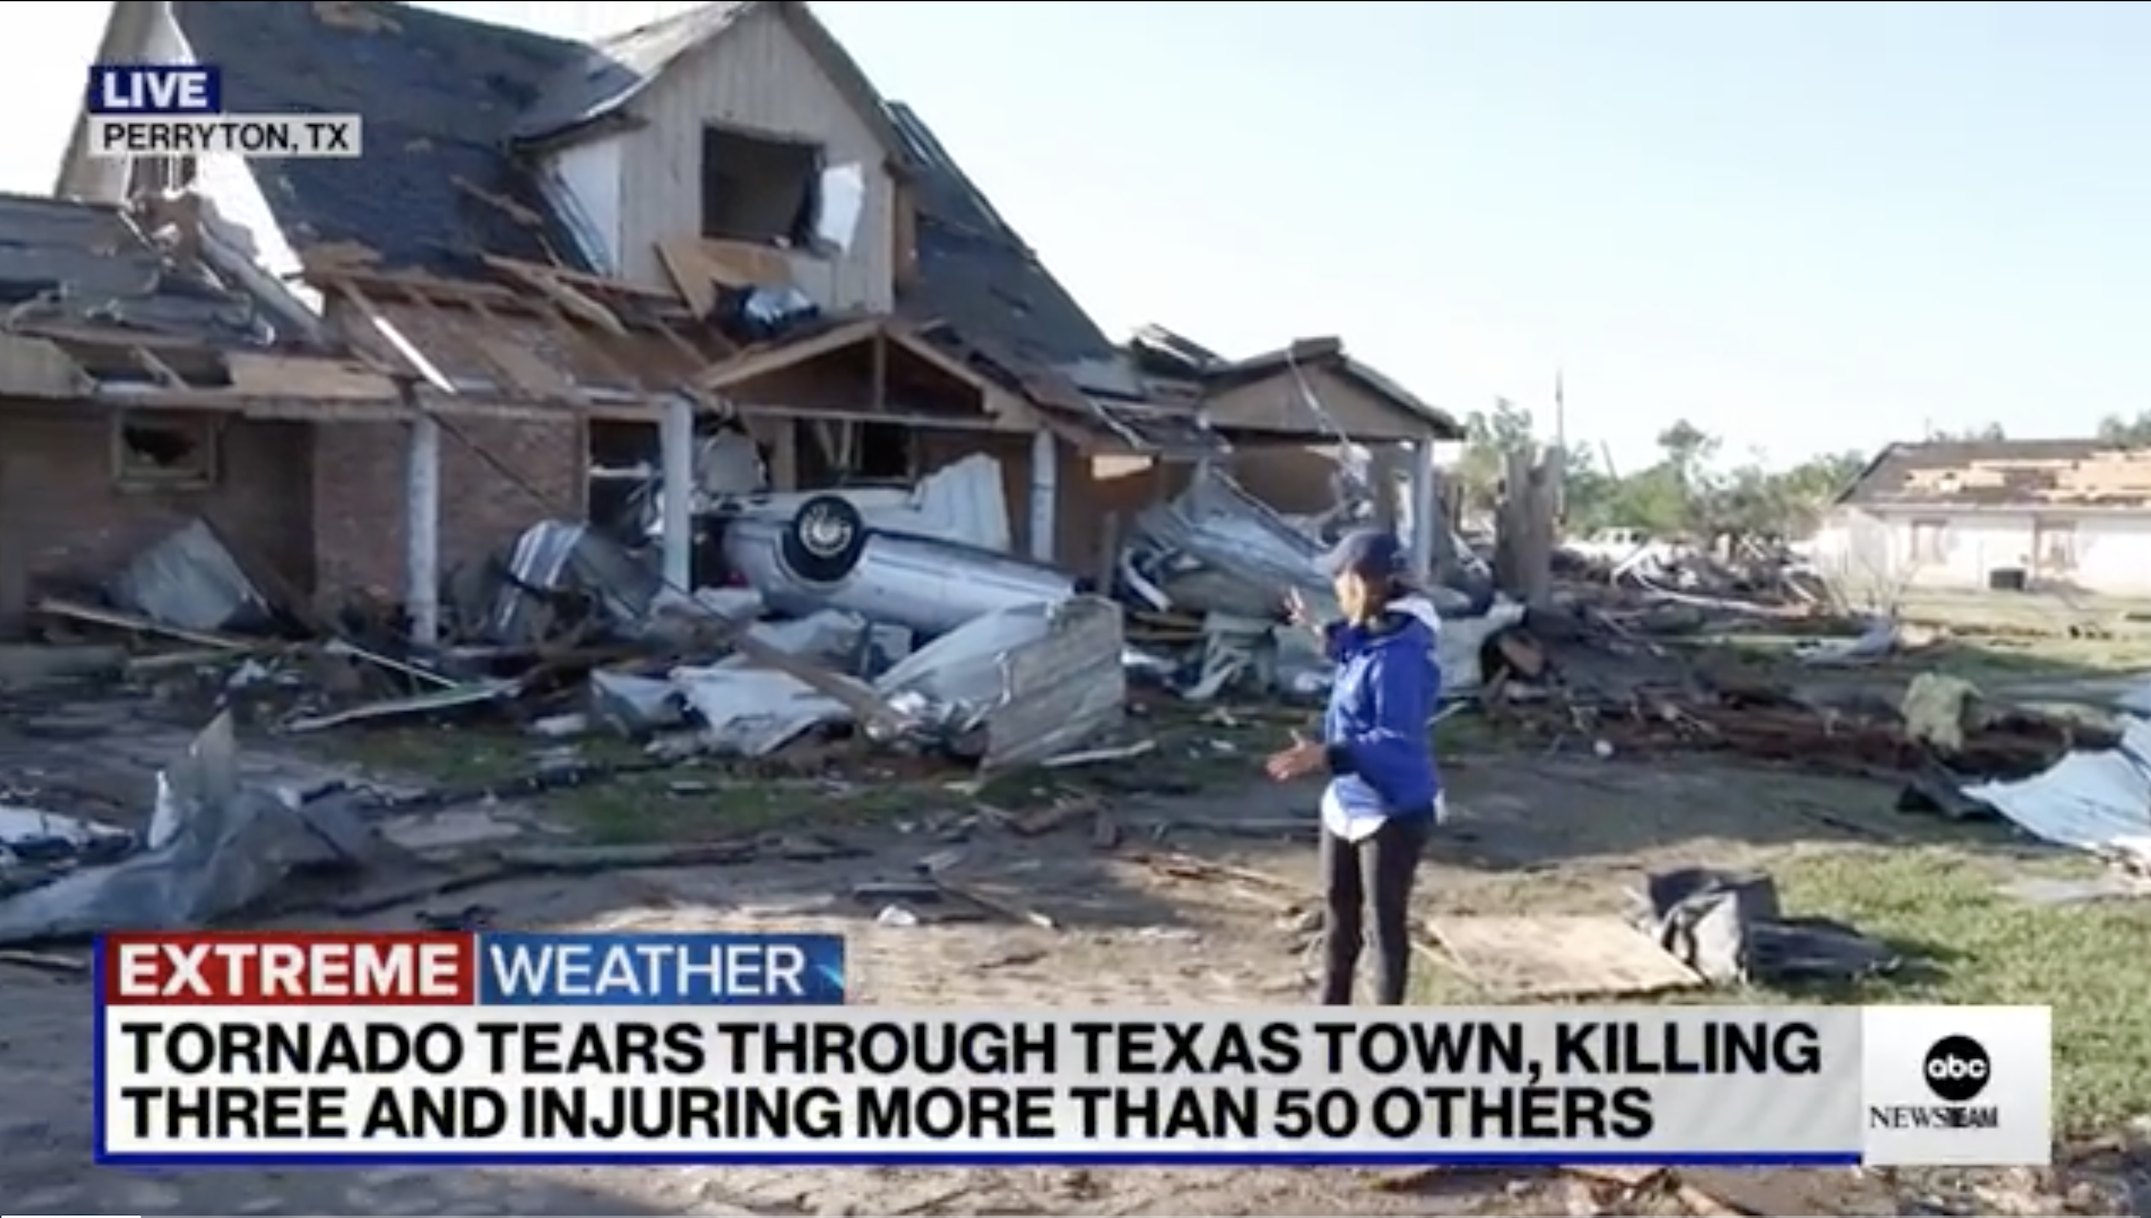 Scene of very damaged house with an upside down vehicle and other debris in front of it, with chyron &quot;Extreme weather: Tornado tears through Texas town, killing three and injuring more than 50 others&quot;